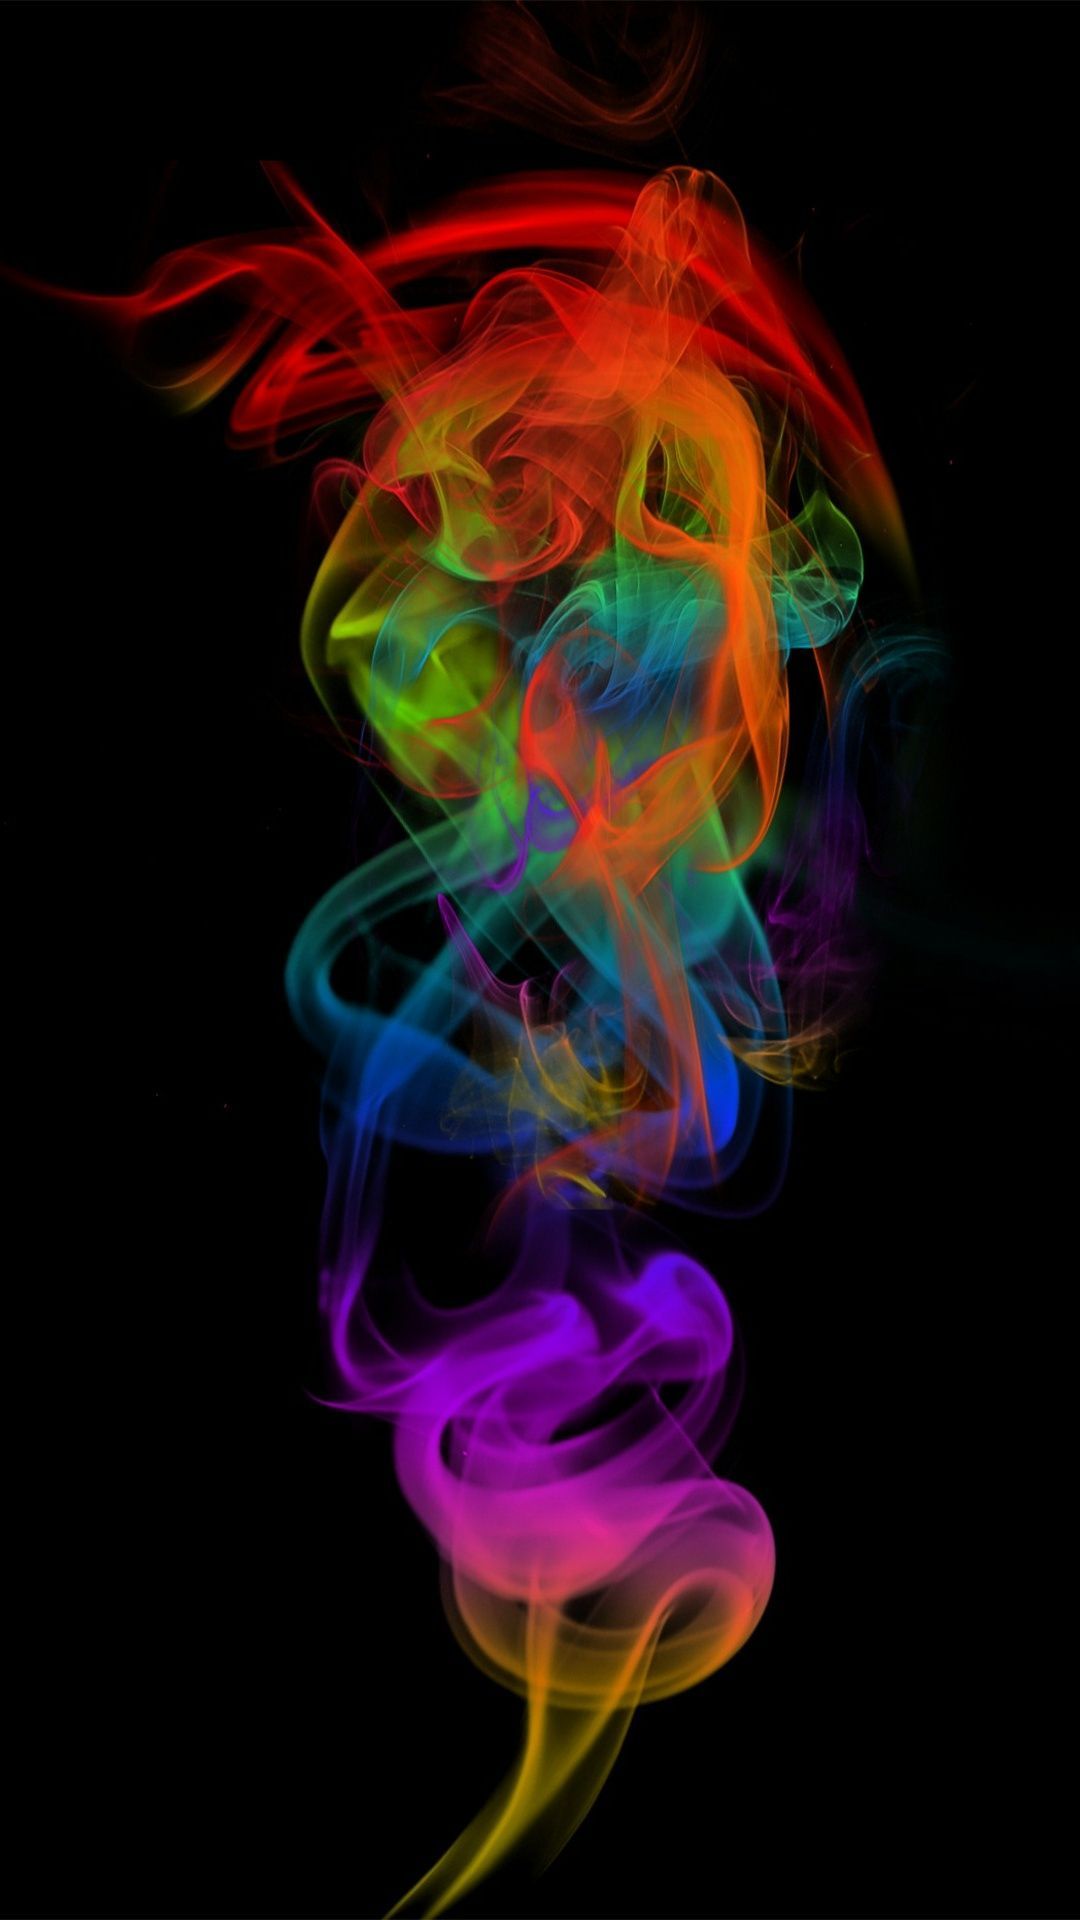 Amoled Colorful Wallpapers - Wallpaper Cave